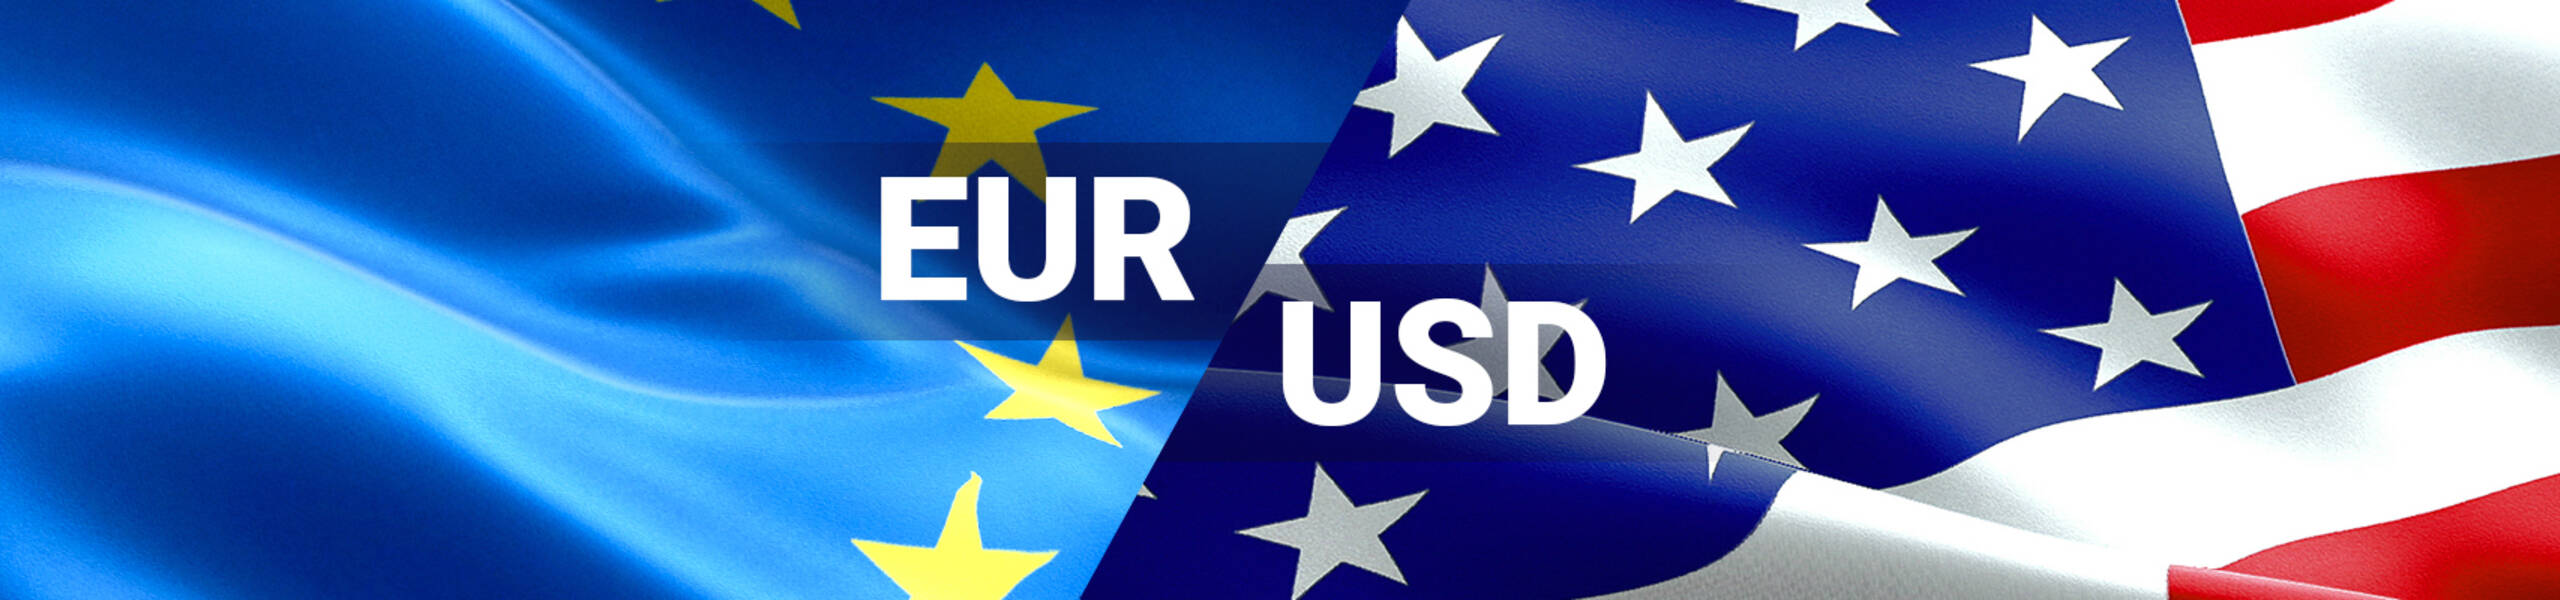 EUR/USD: euro reached new highs